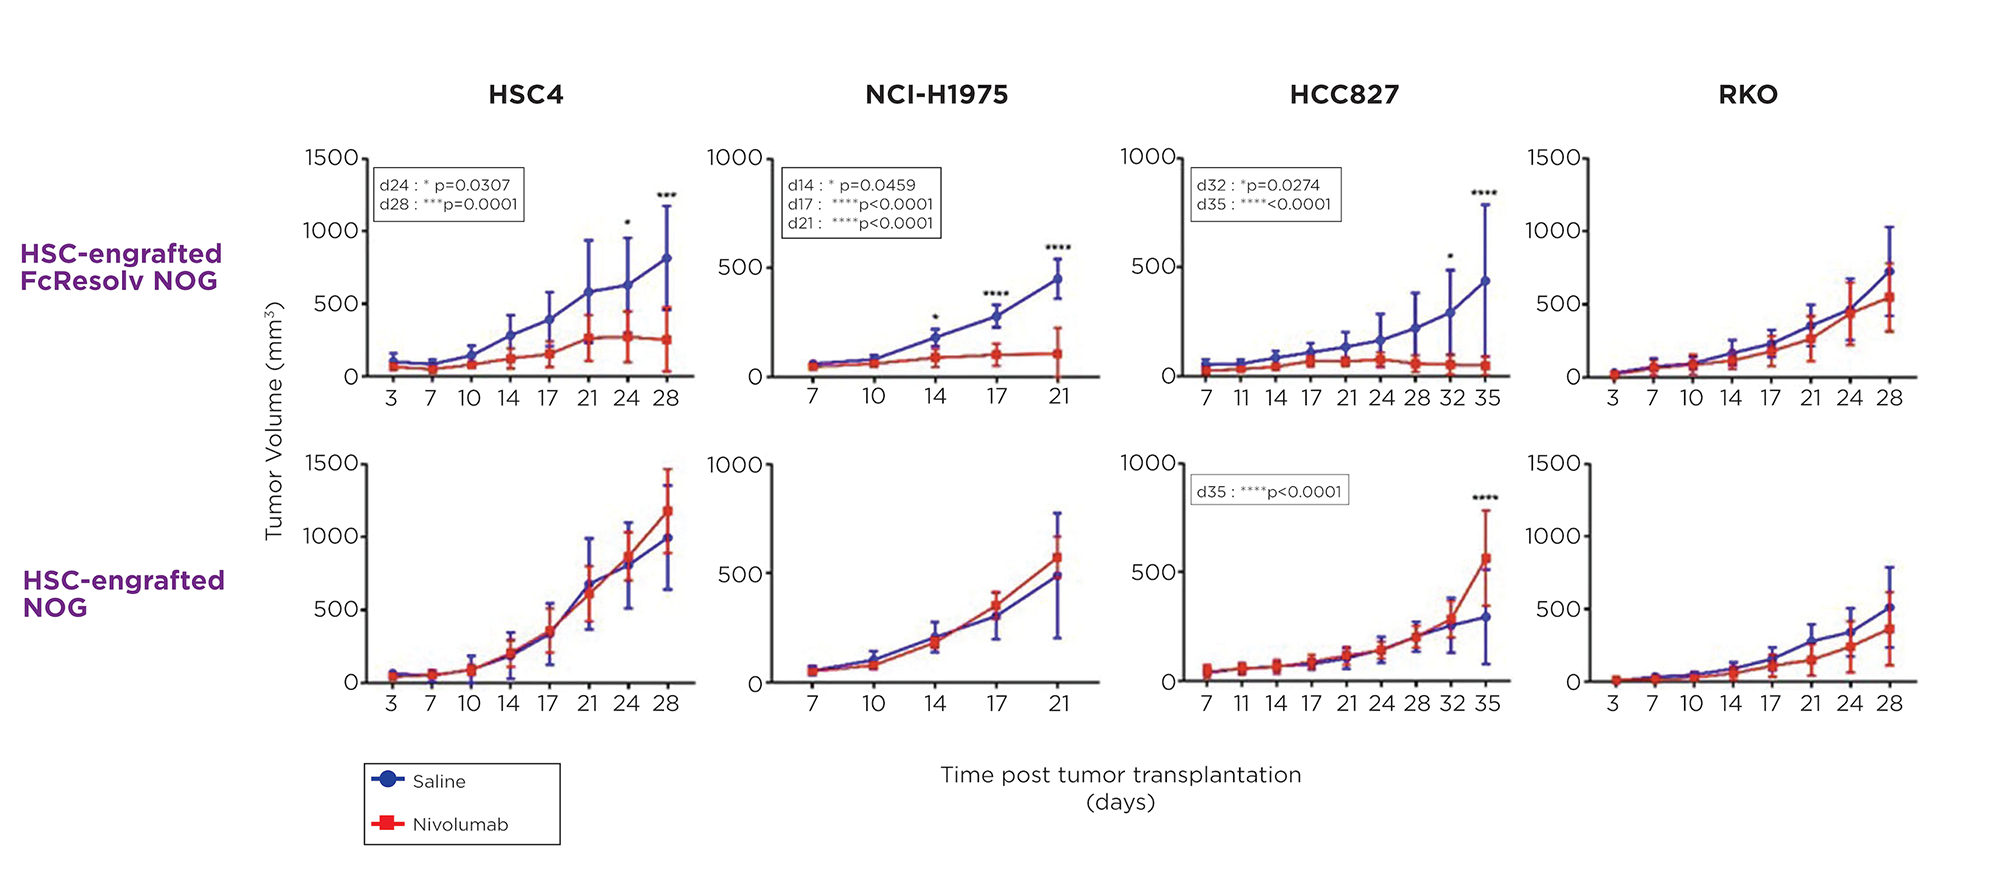 Ablating murine FcgR activity enables accurate detection of immunotherapy efficacy in humanized mice engrafted with tumors. Nivolumab (anti-PD1) does not suppress tumor growth in HSC-engrafted NOG mice (bottom row) but displays anti-tumor efficacy in HSC-engrafted FcResolv NOG mice (top row).